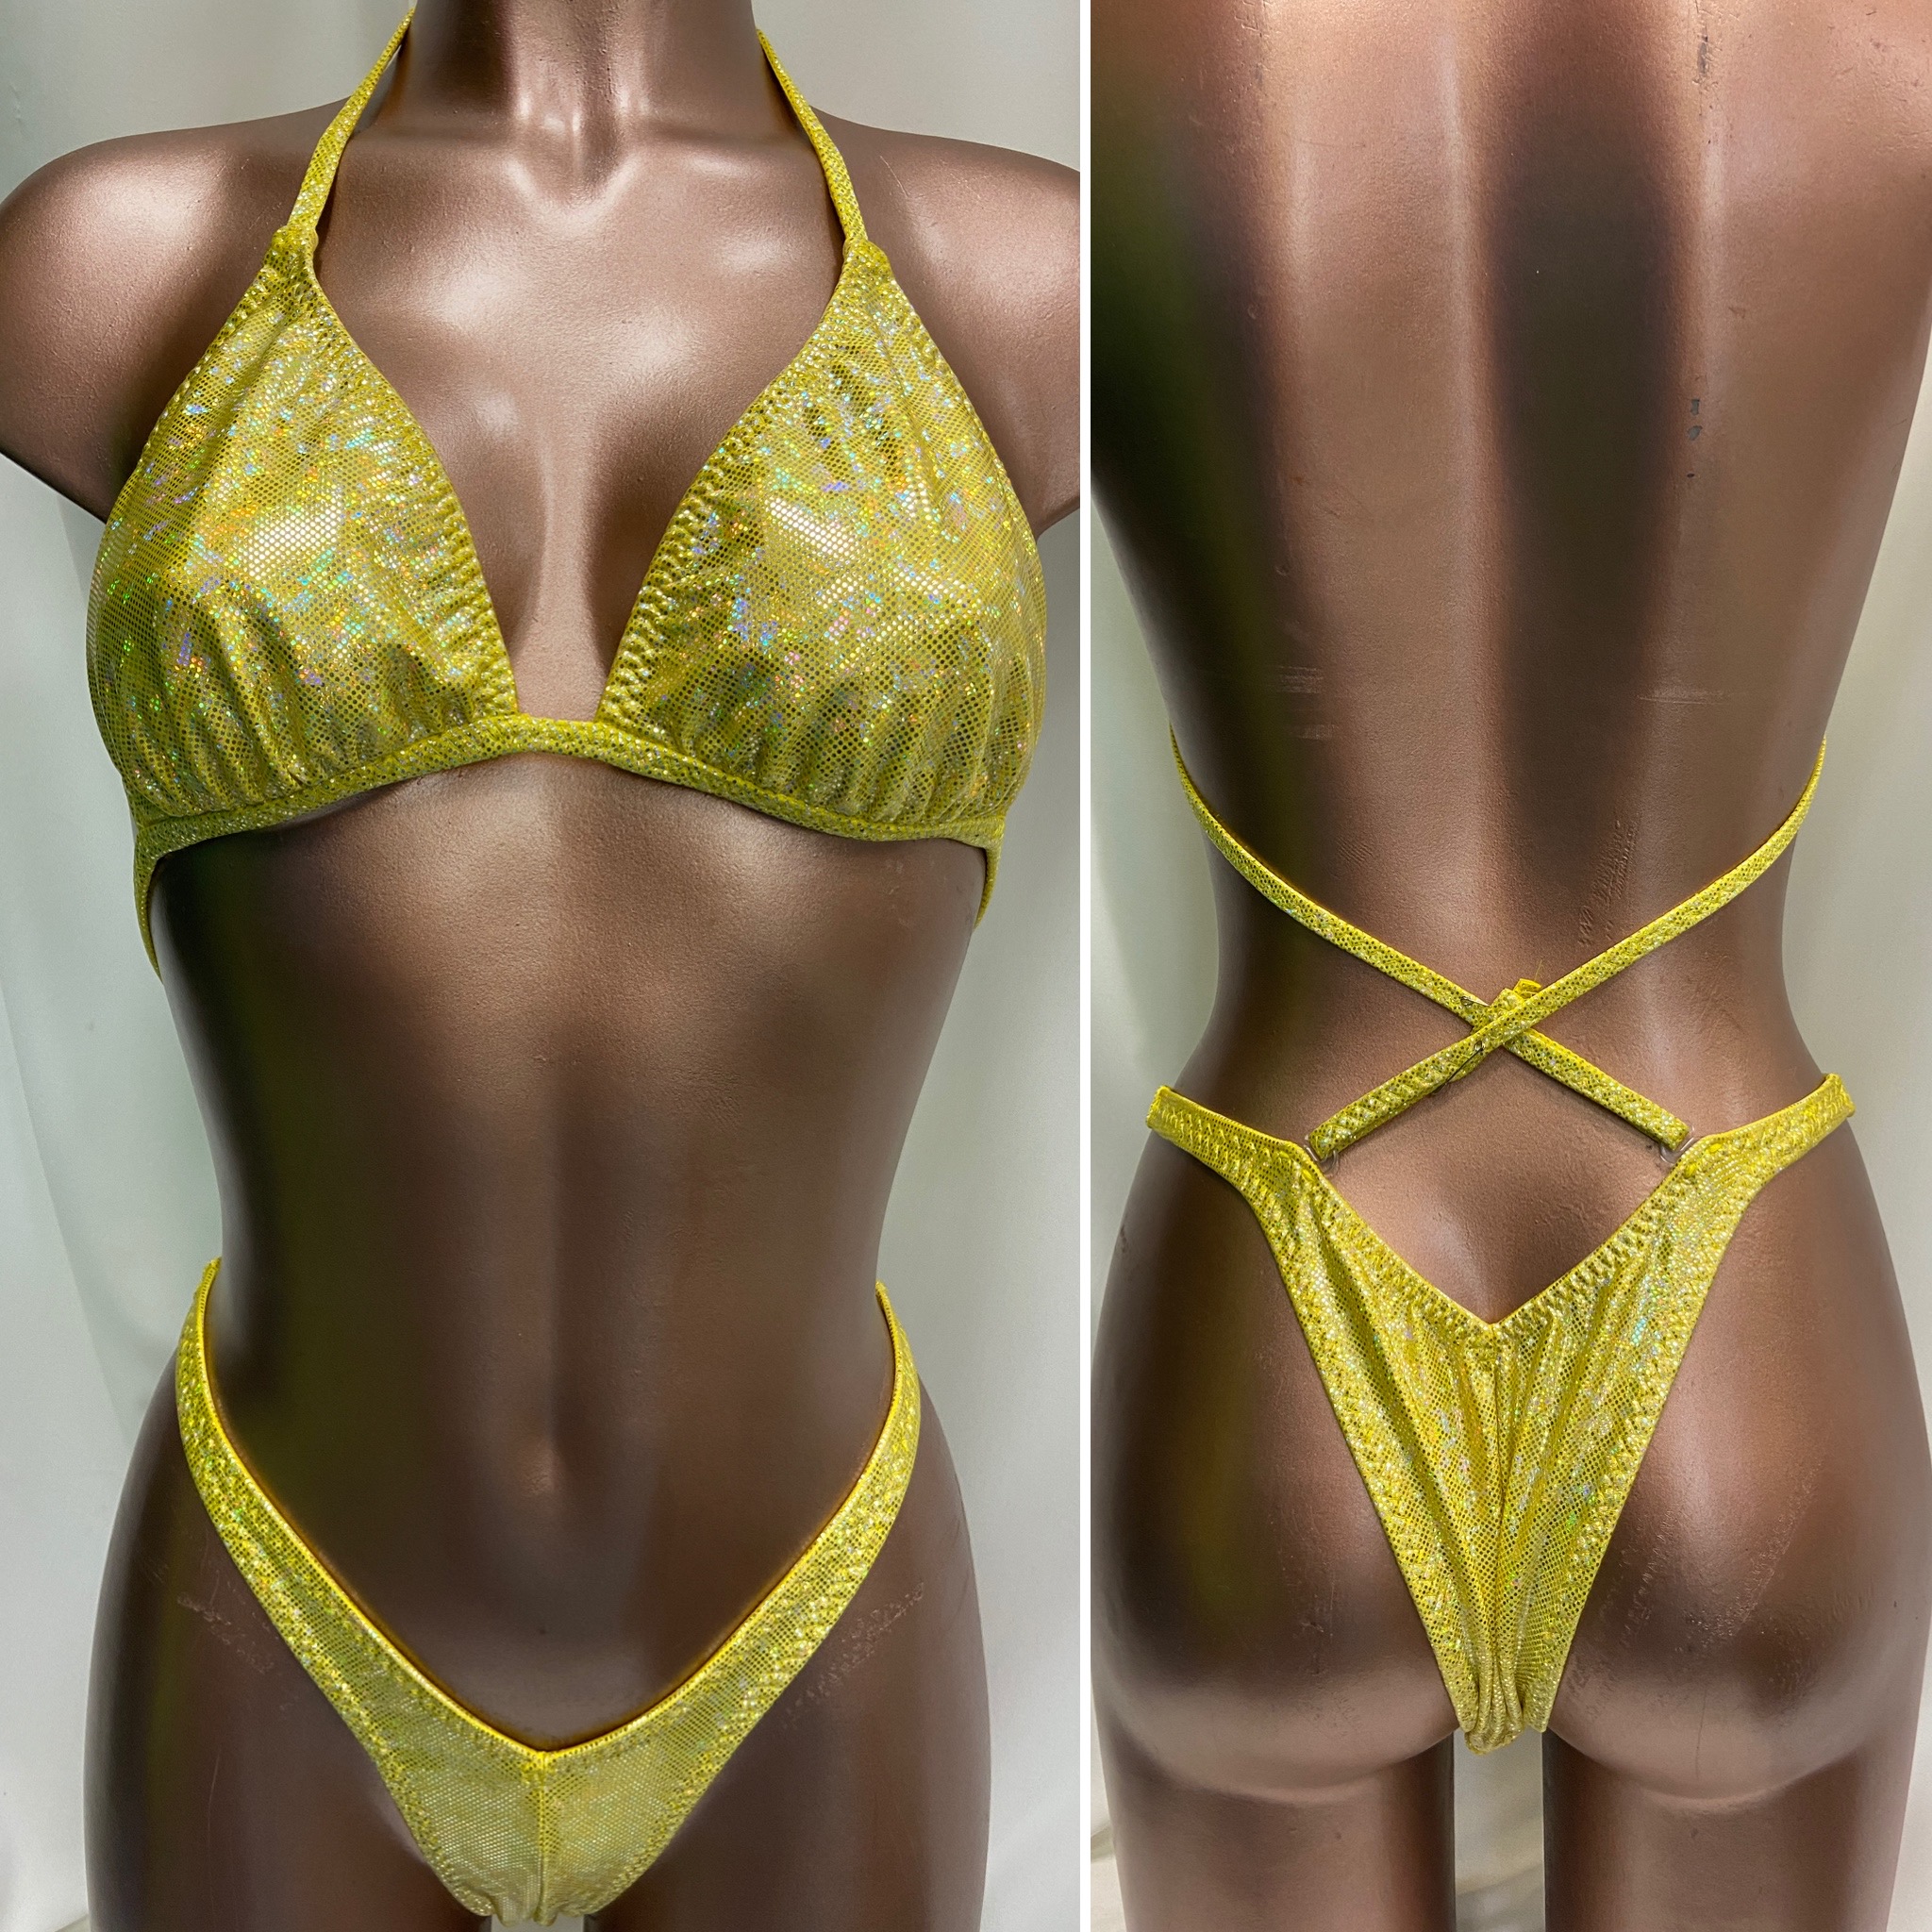 P8027
$85
C + banded top
small front, xsmall back
yellow shattered hologram 